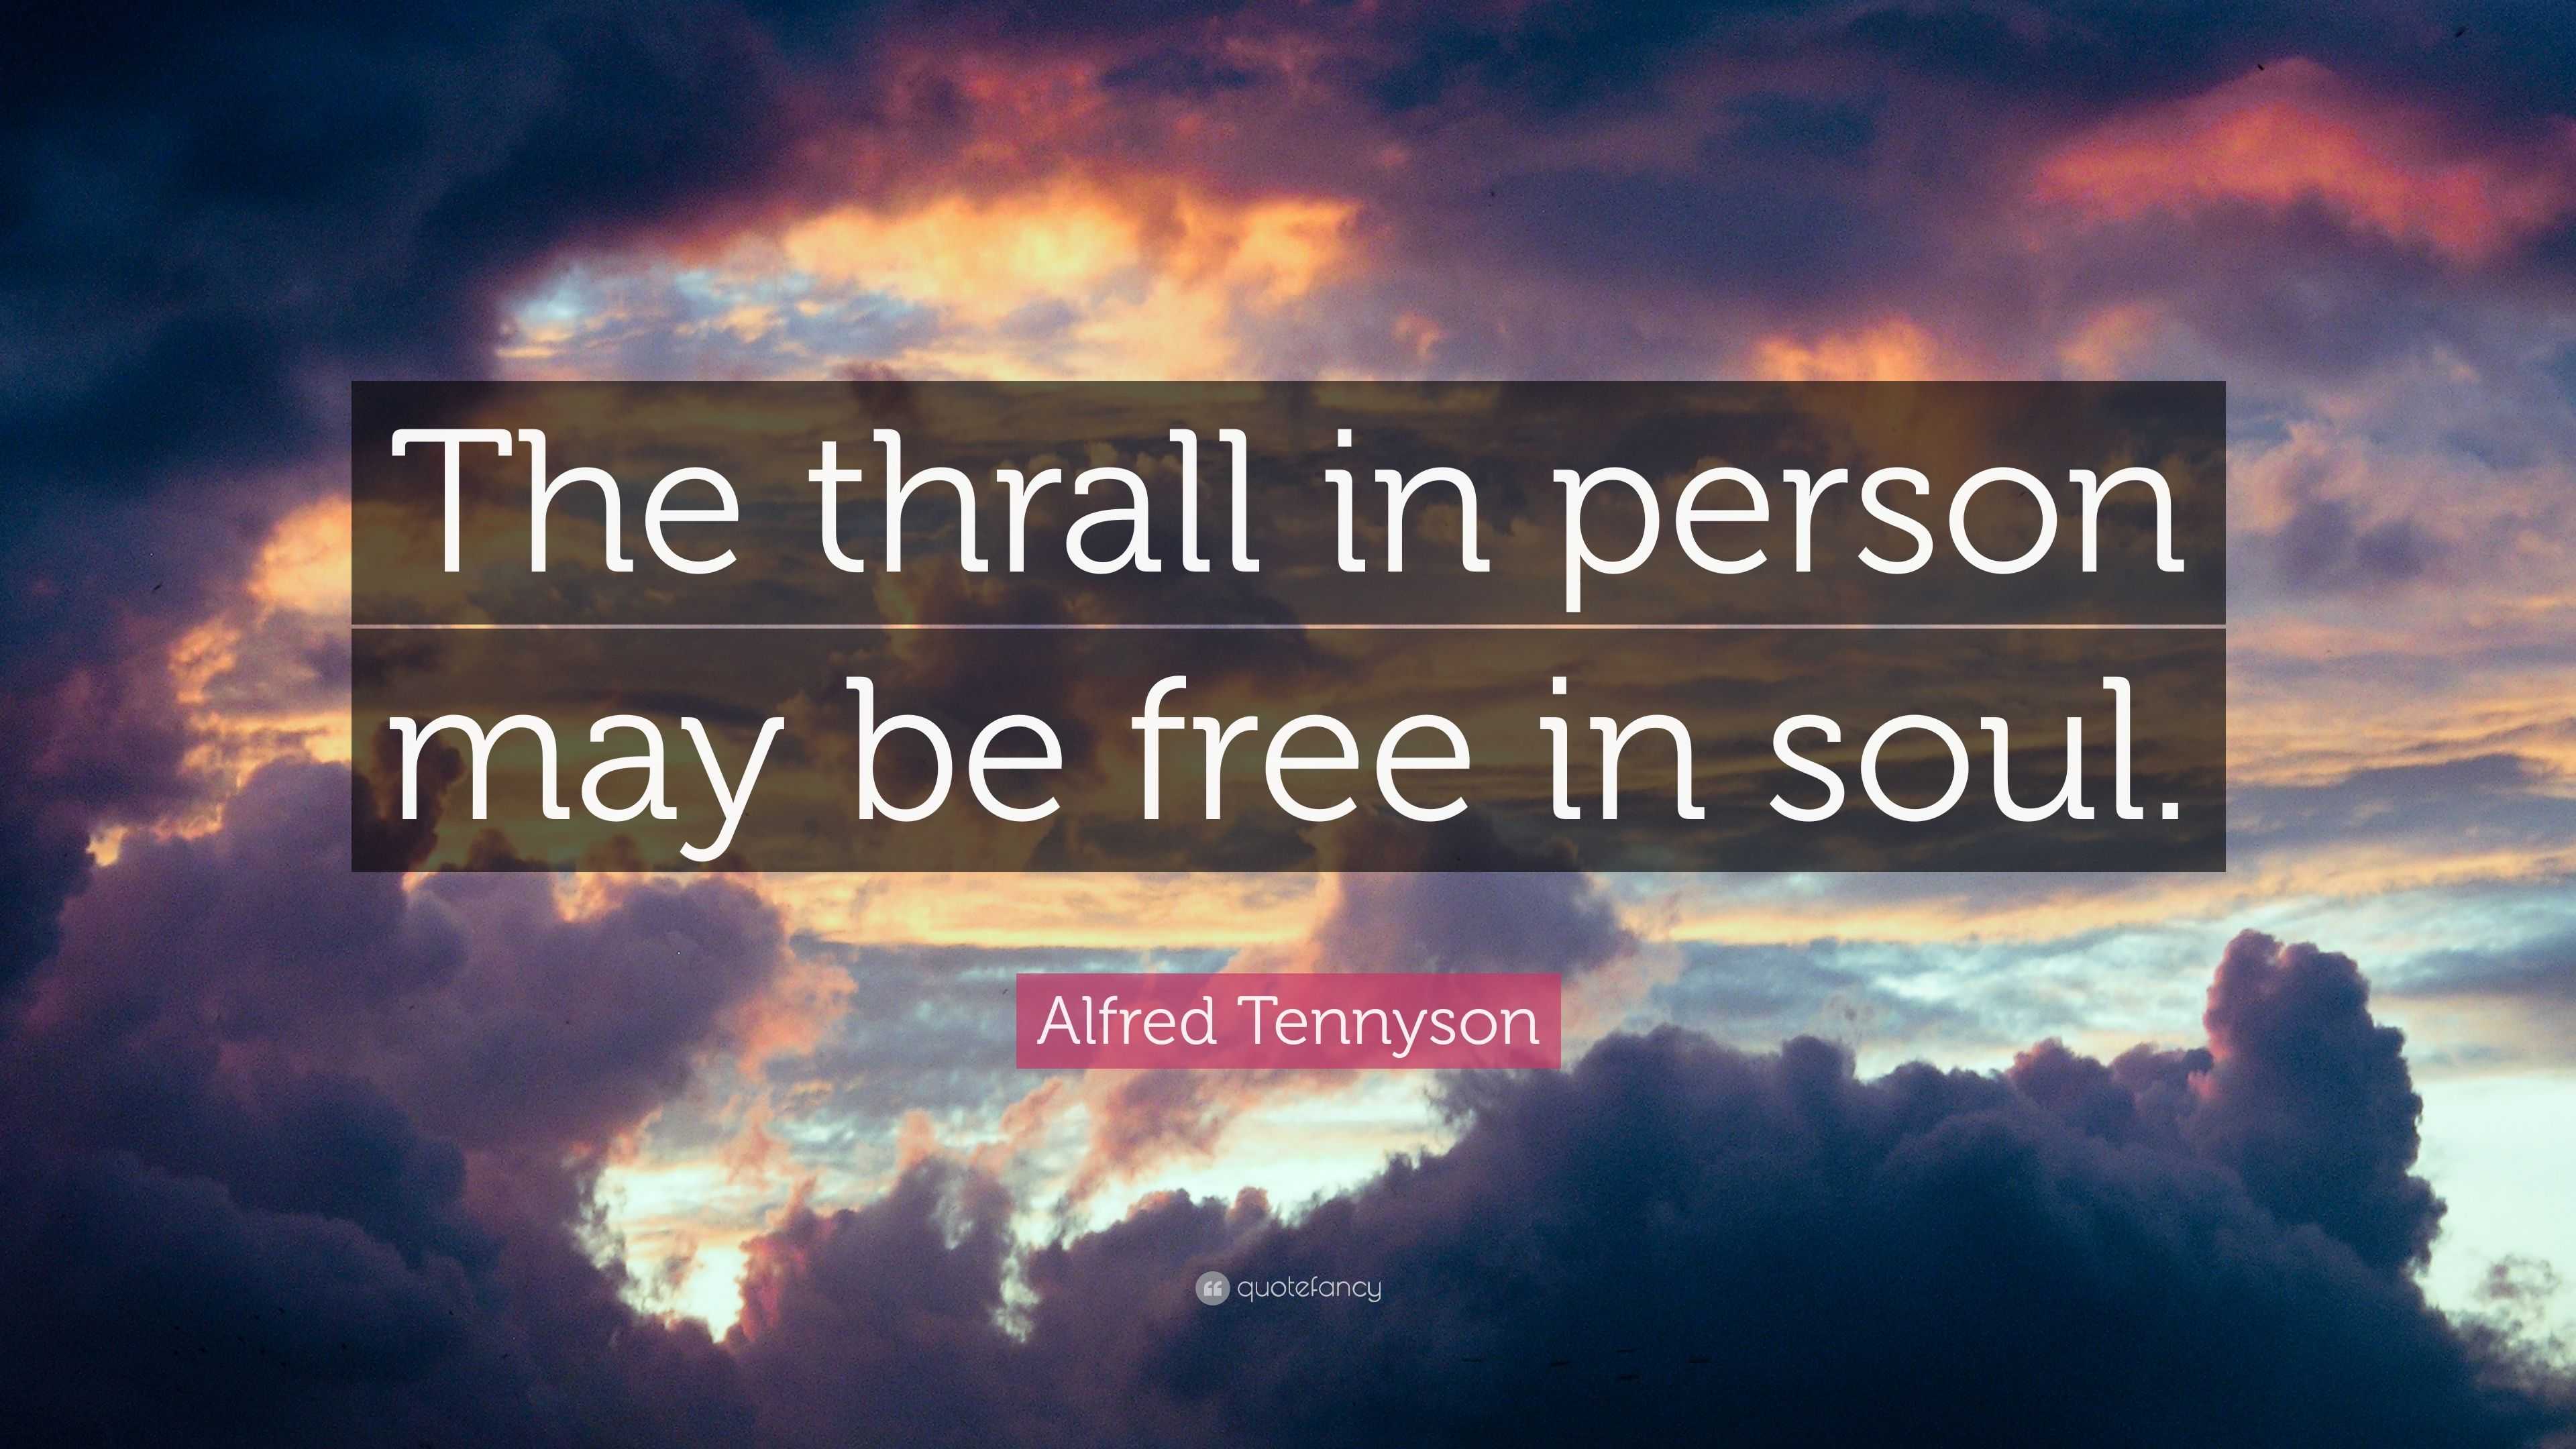 Alfred Tennyson Quote The Thrall In Person May Be Free In Soul Images, Photos, Reviews